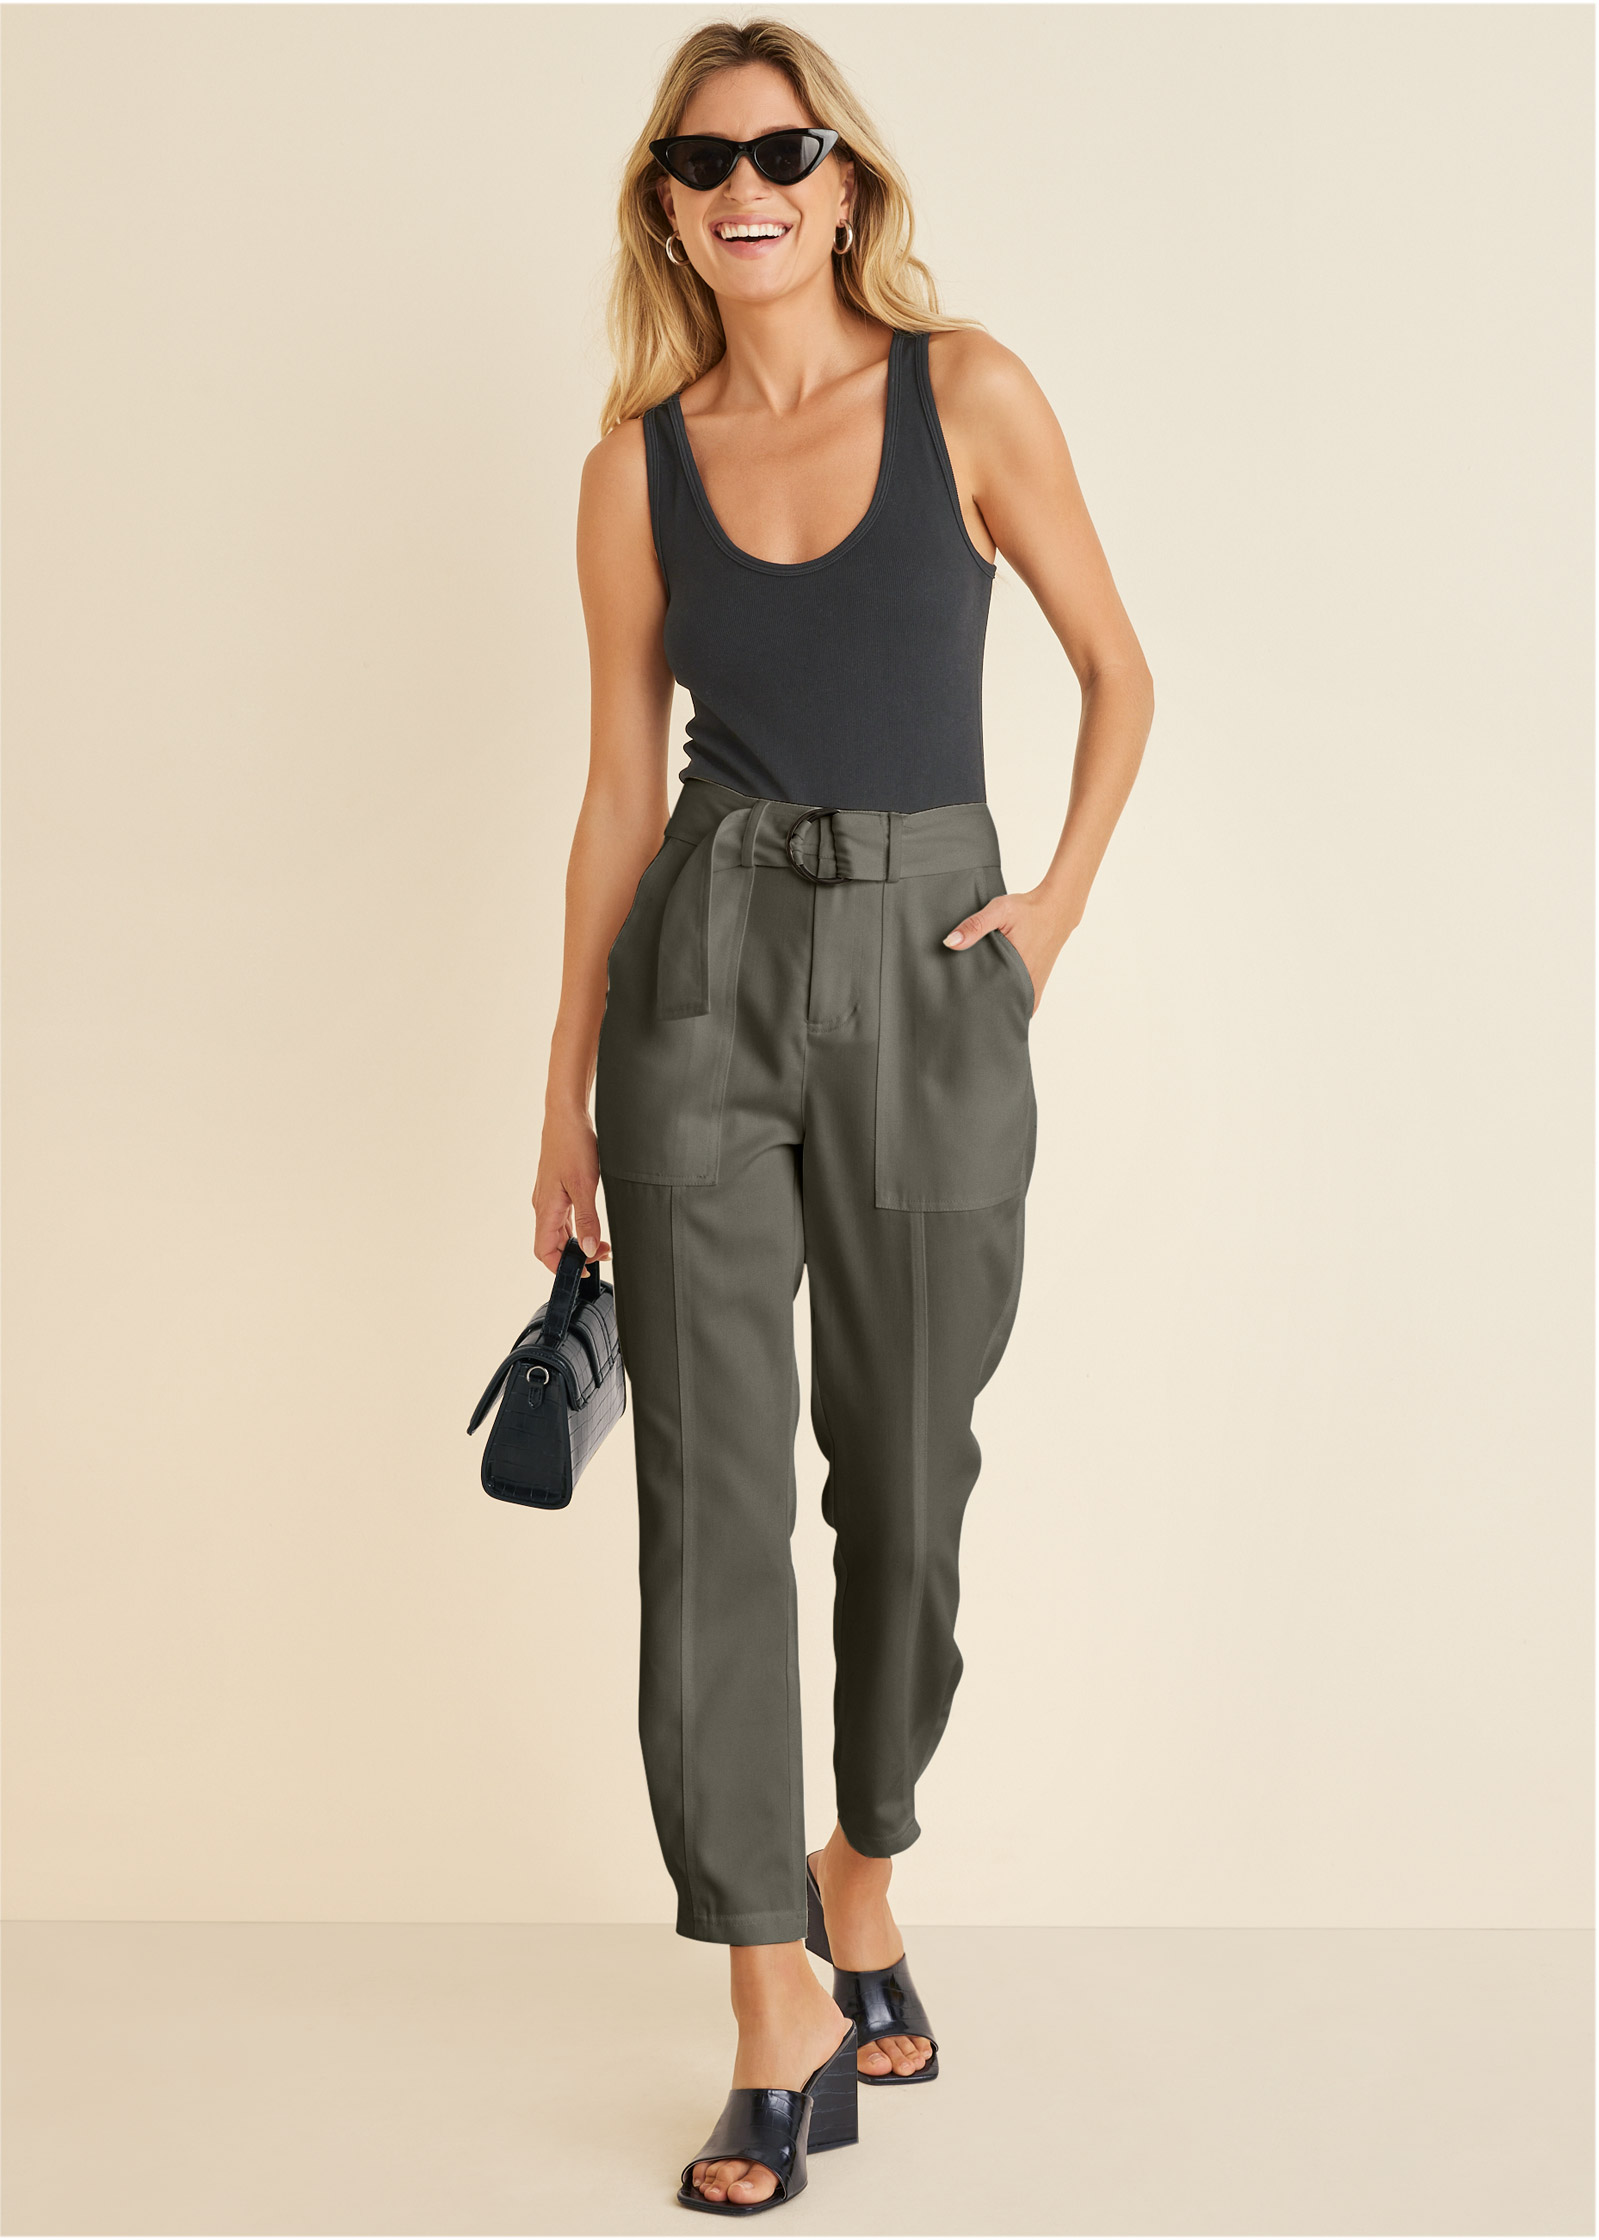 RELAXED TWILL STRAIGHT PANT in Olive | VENUS